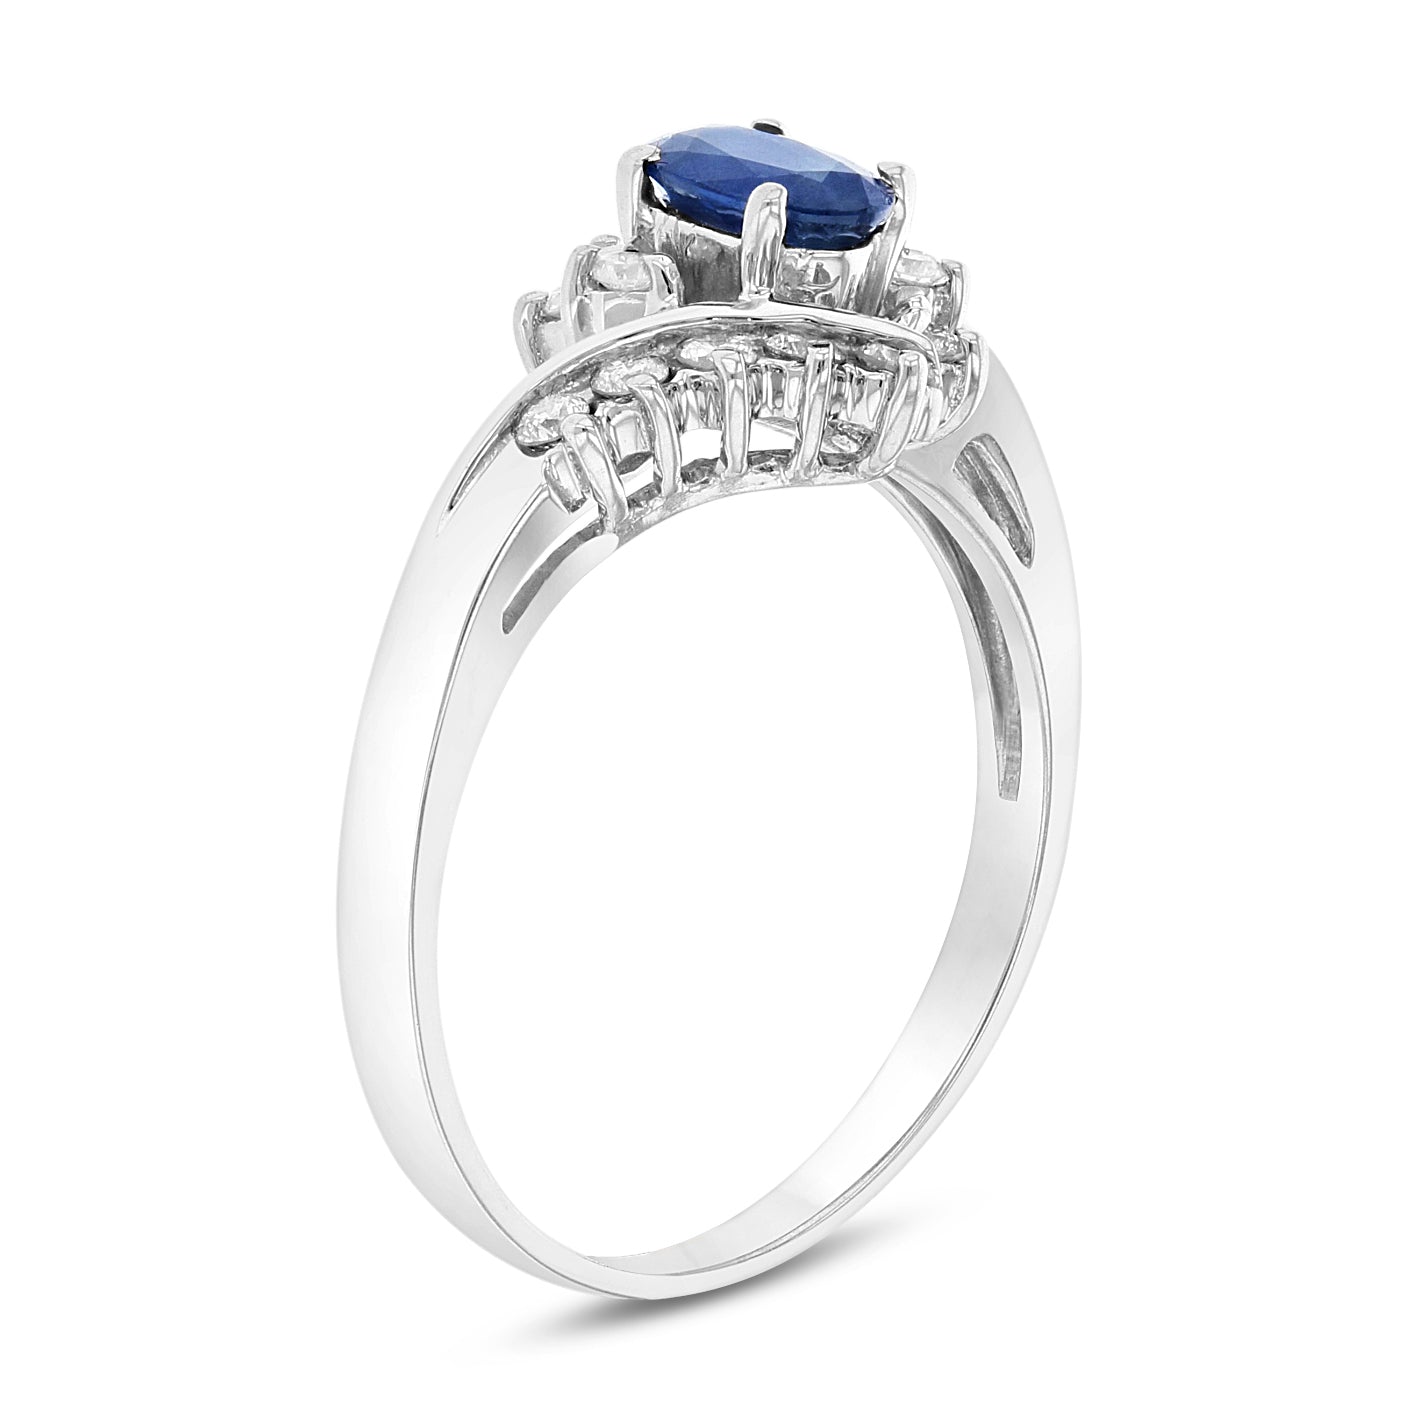 3/4ct Oval-Cut Blue Sapphire & Diamond Bypass Halo Ring in 14k White Gold